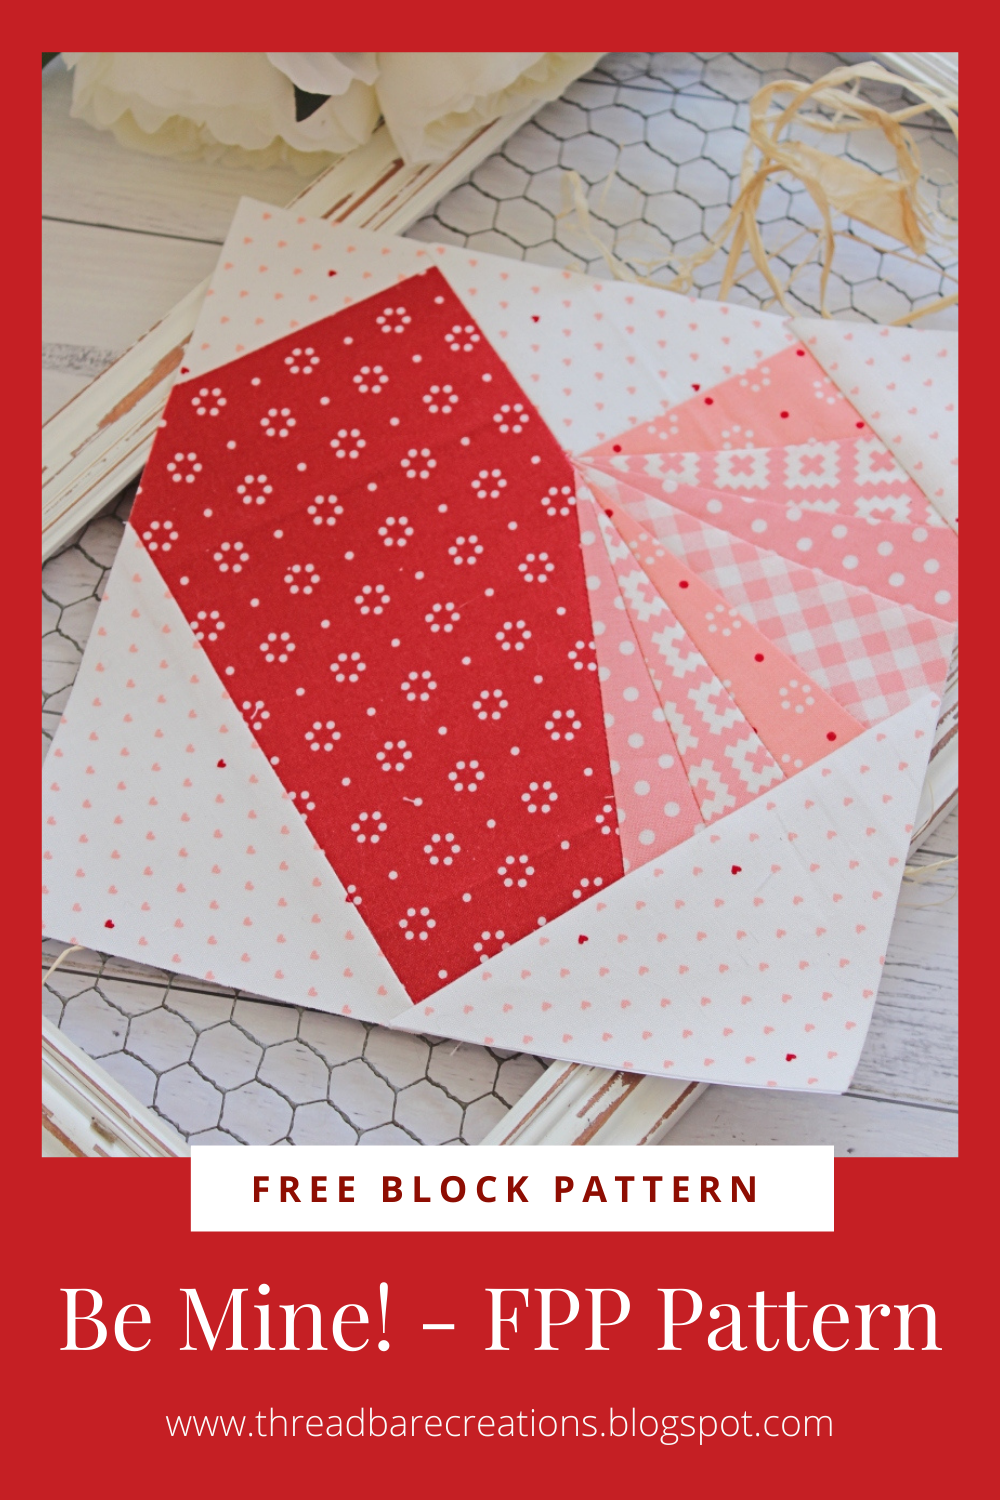 Nine Awesome Foundation Paper Pieced Quilt Patterns that are Free!